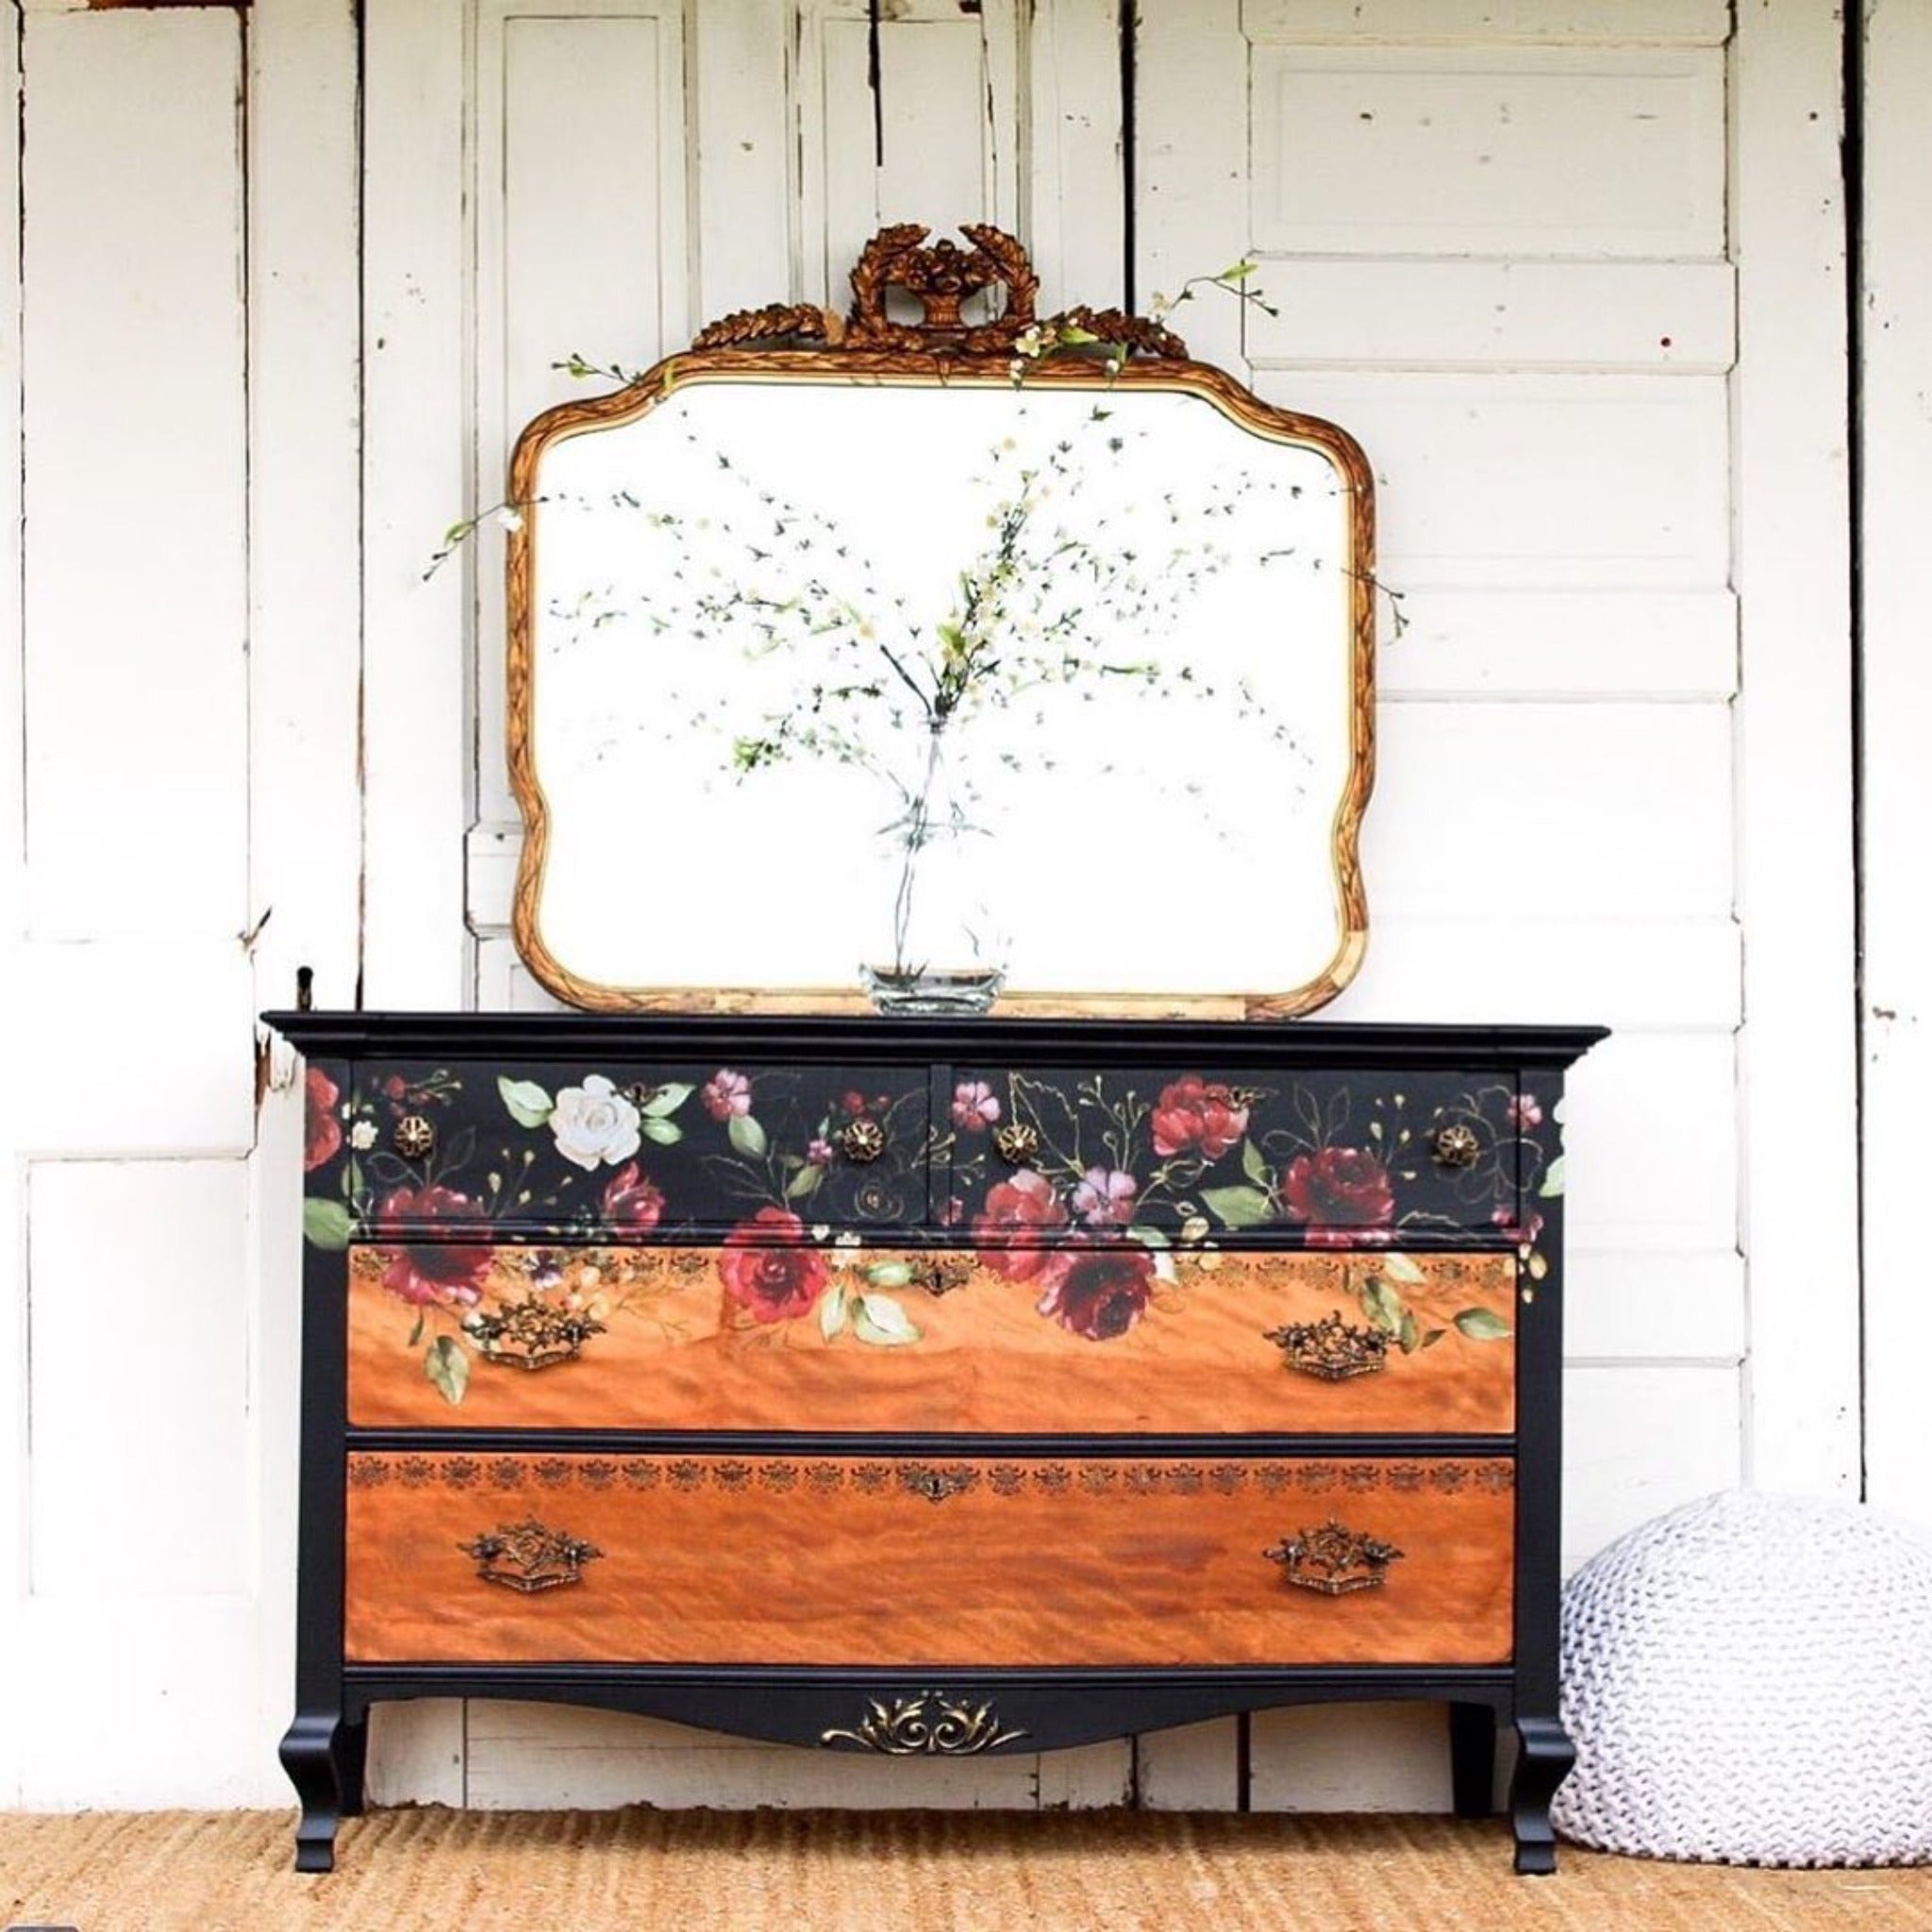 A vintage dresser is painted black with 2 large natural wood drawers and features ReDesign with Prima's Midnight Floral transfer on it. 